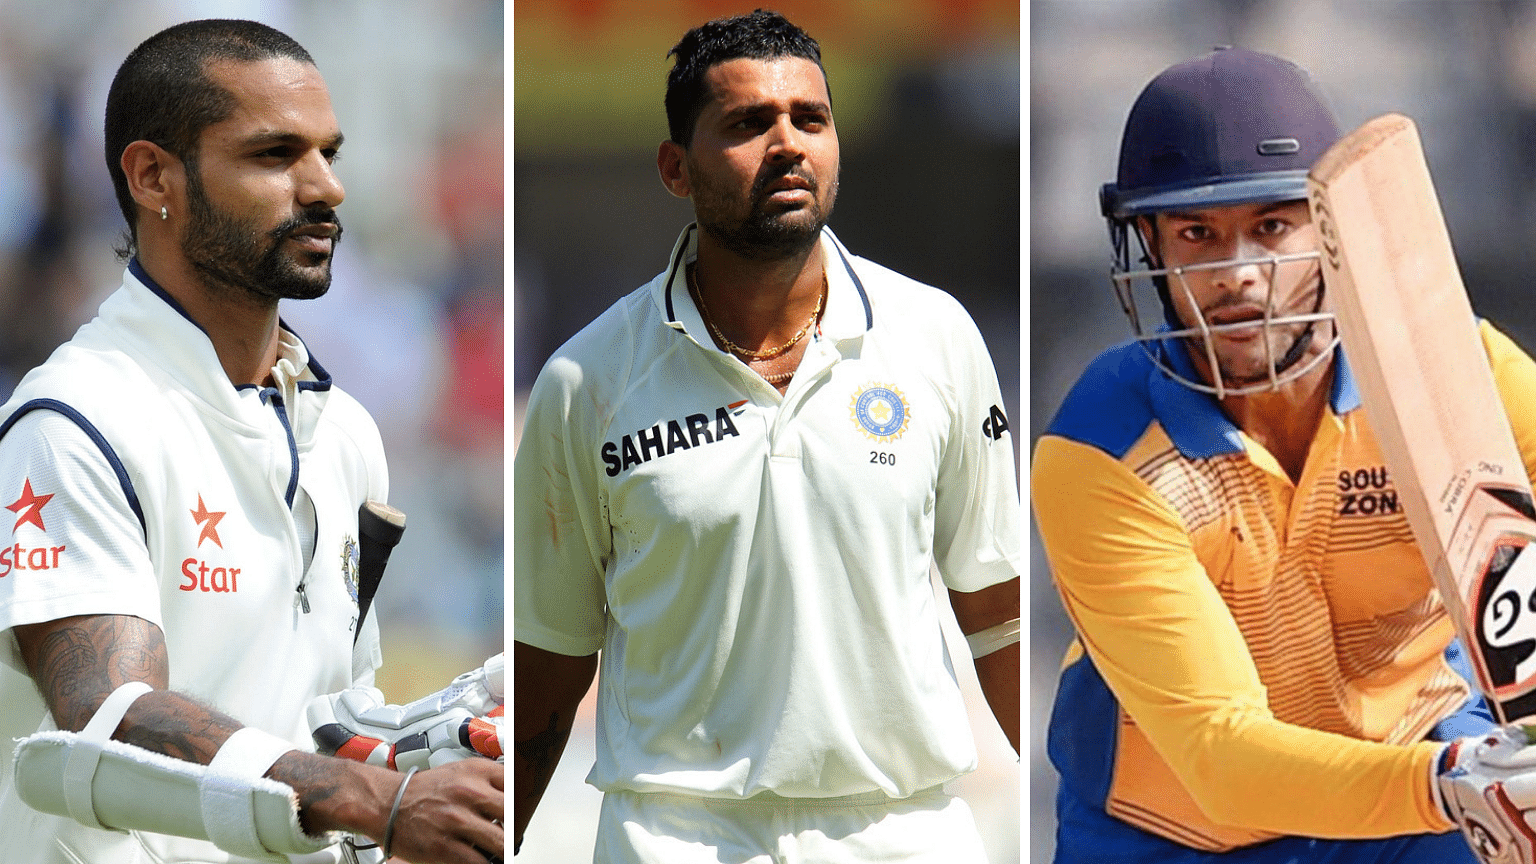 Shikhar Dhawan, Murali Vijay or Mayank Agarwal – who is likely to replace Prithvi Shaw in the opening slot after the teenager picked up an injury during a warm-up game?